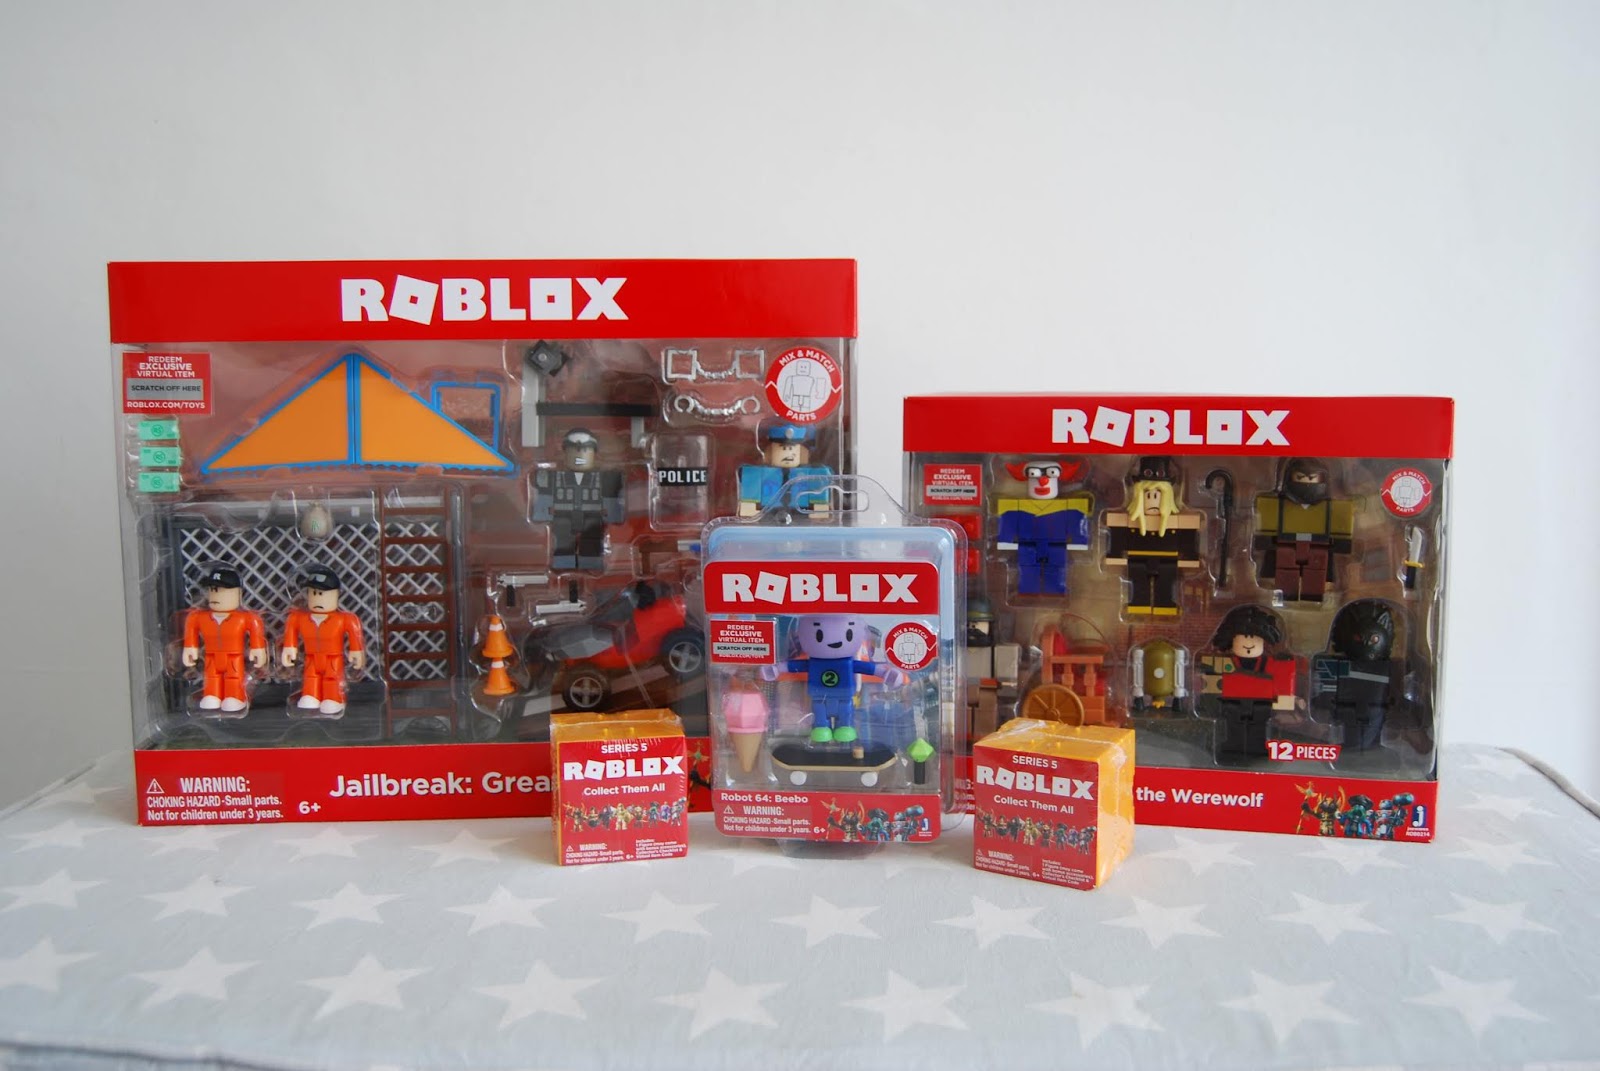 Chic Geek Diary Roblox Series 5 Toys Review Giveaway - roblox mix match jailbreak great escape 3 figure 4 pack set